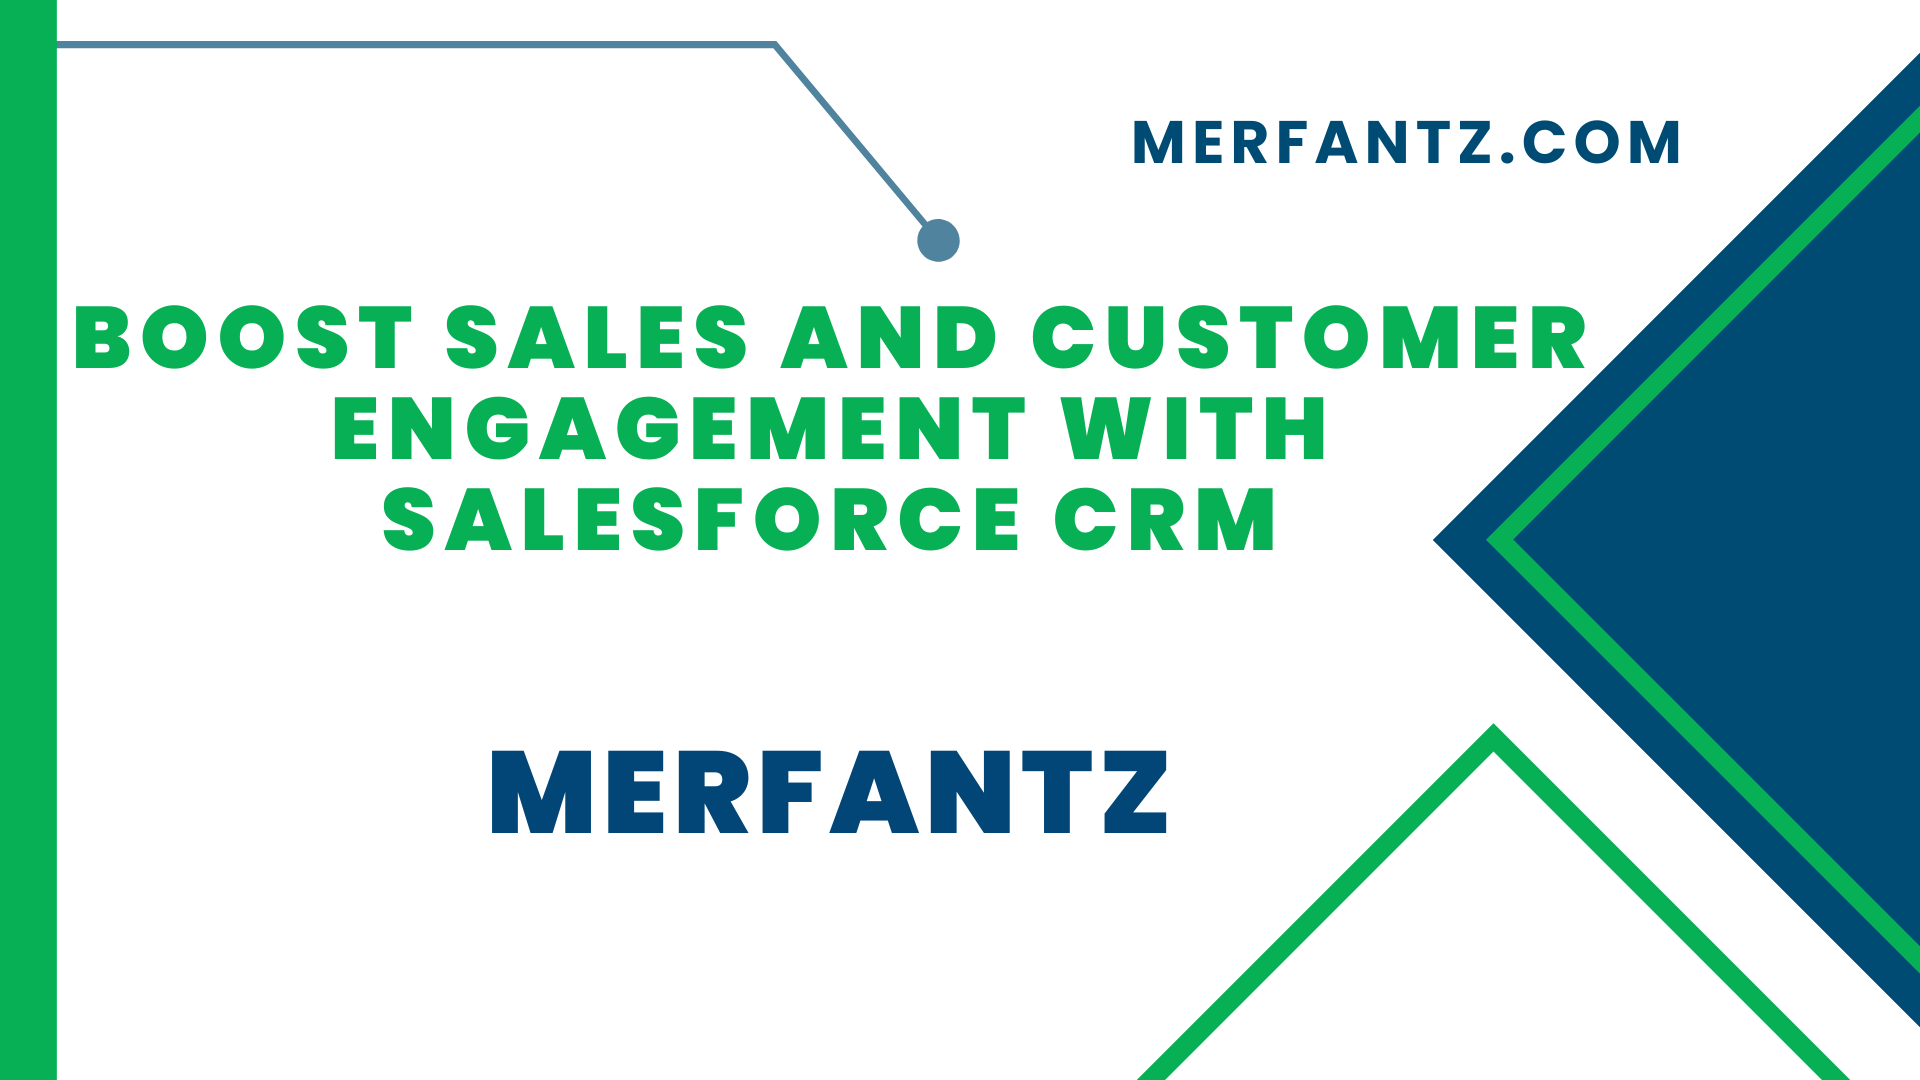 Boost Sales and Customer Engagement with Salesforce CRM